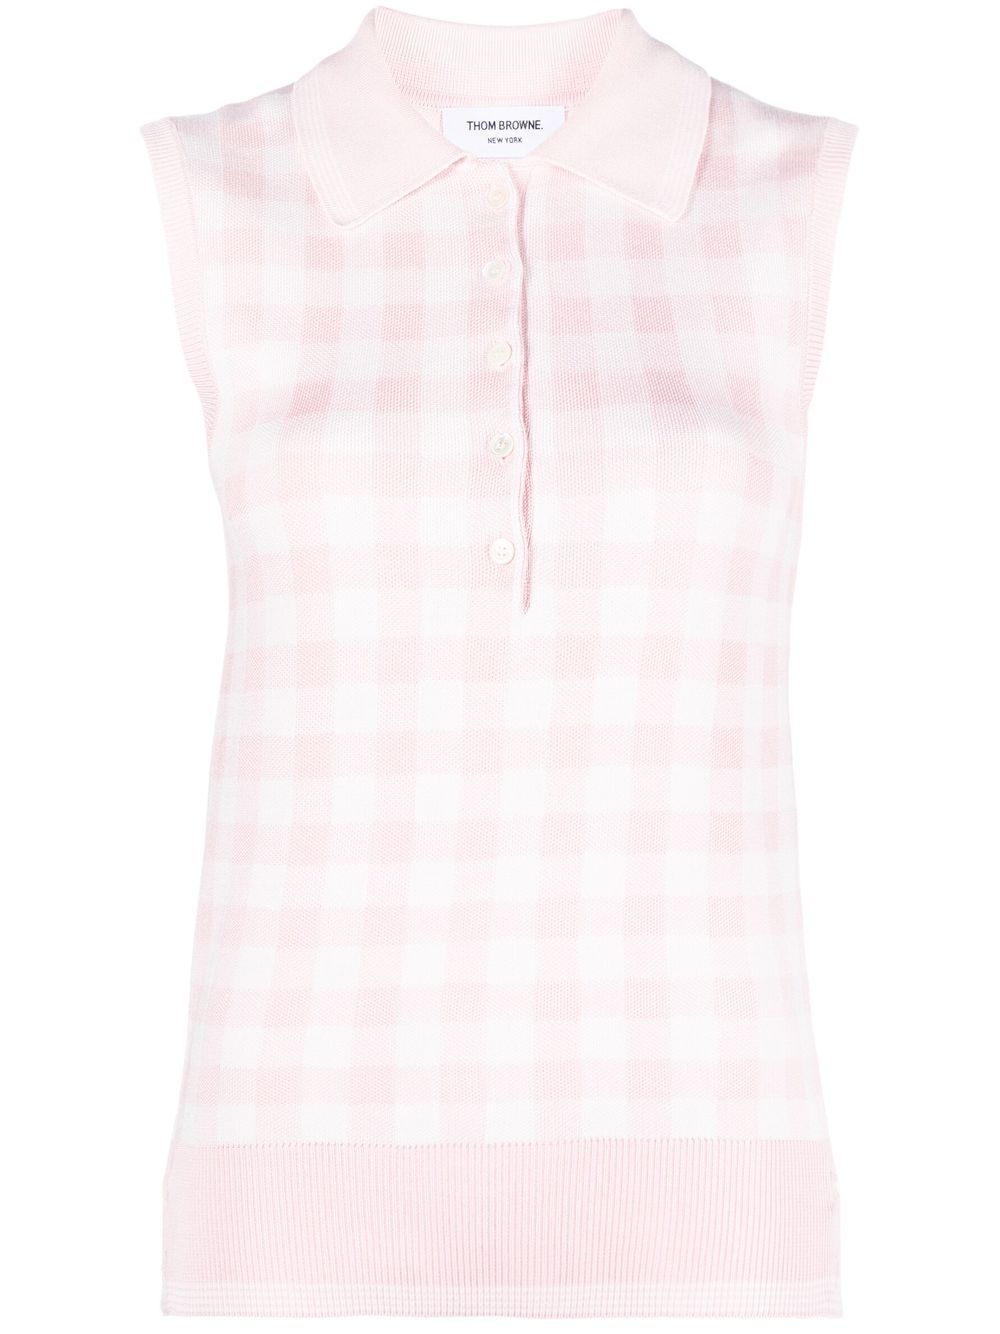 Thom Browne gingham silk knitted vest - Pink